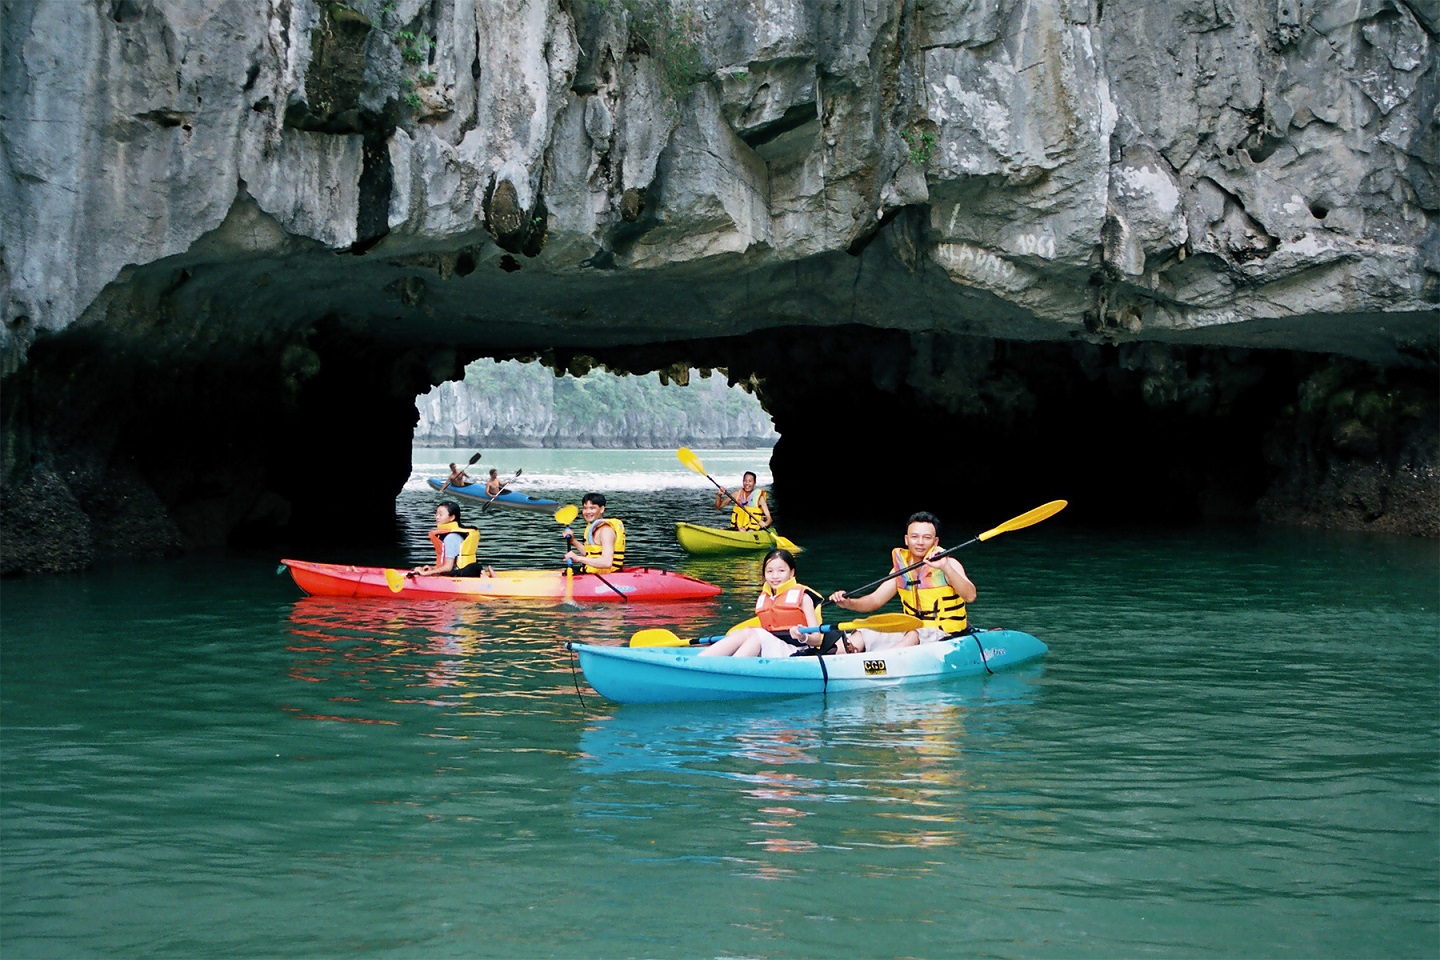 Halong bay is perfect for kayaking